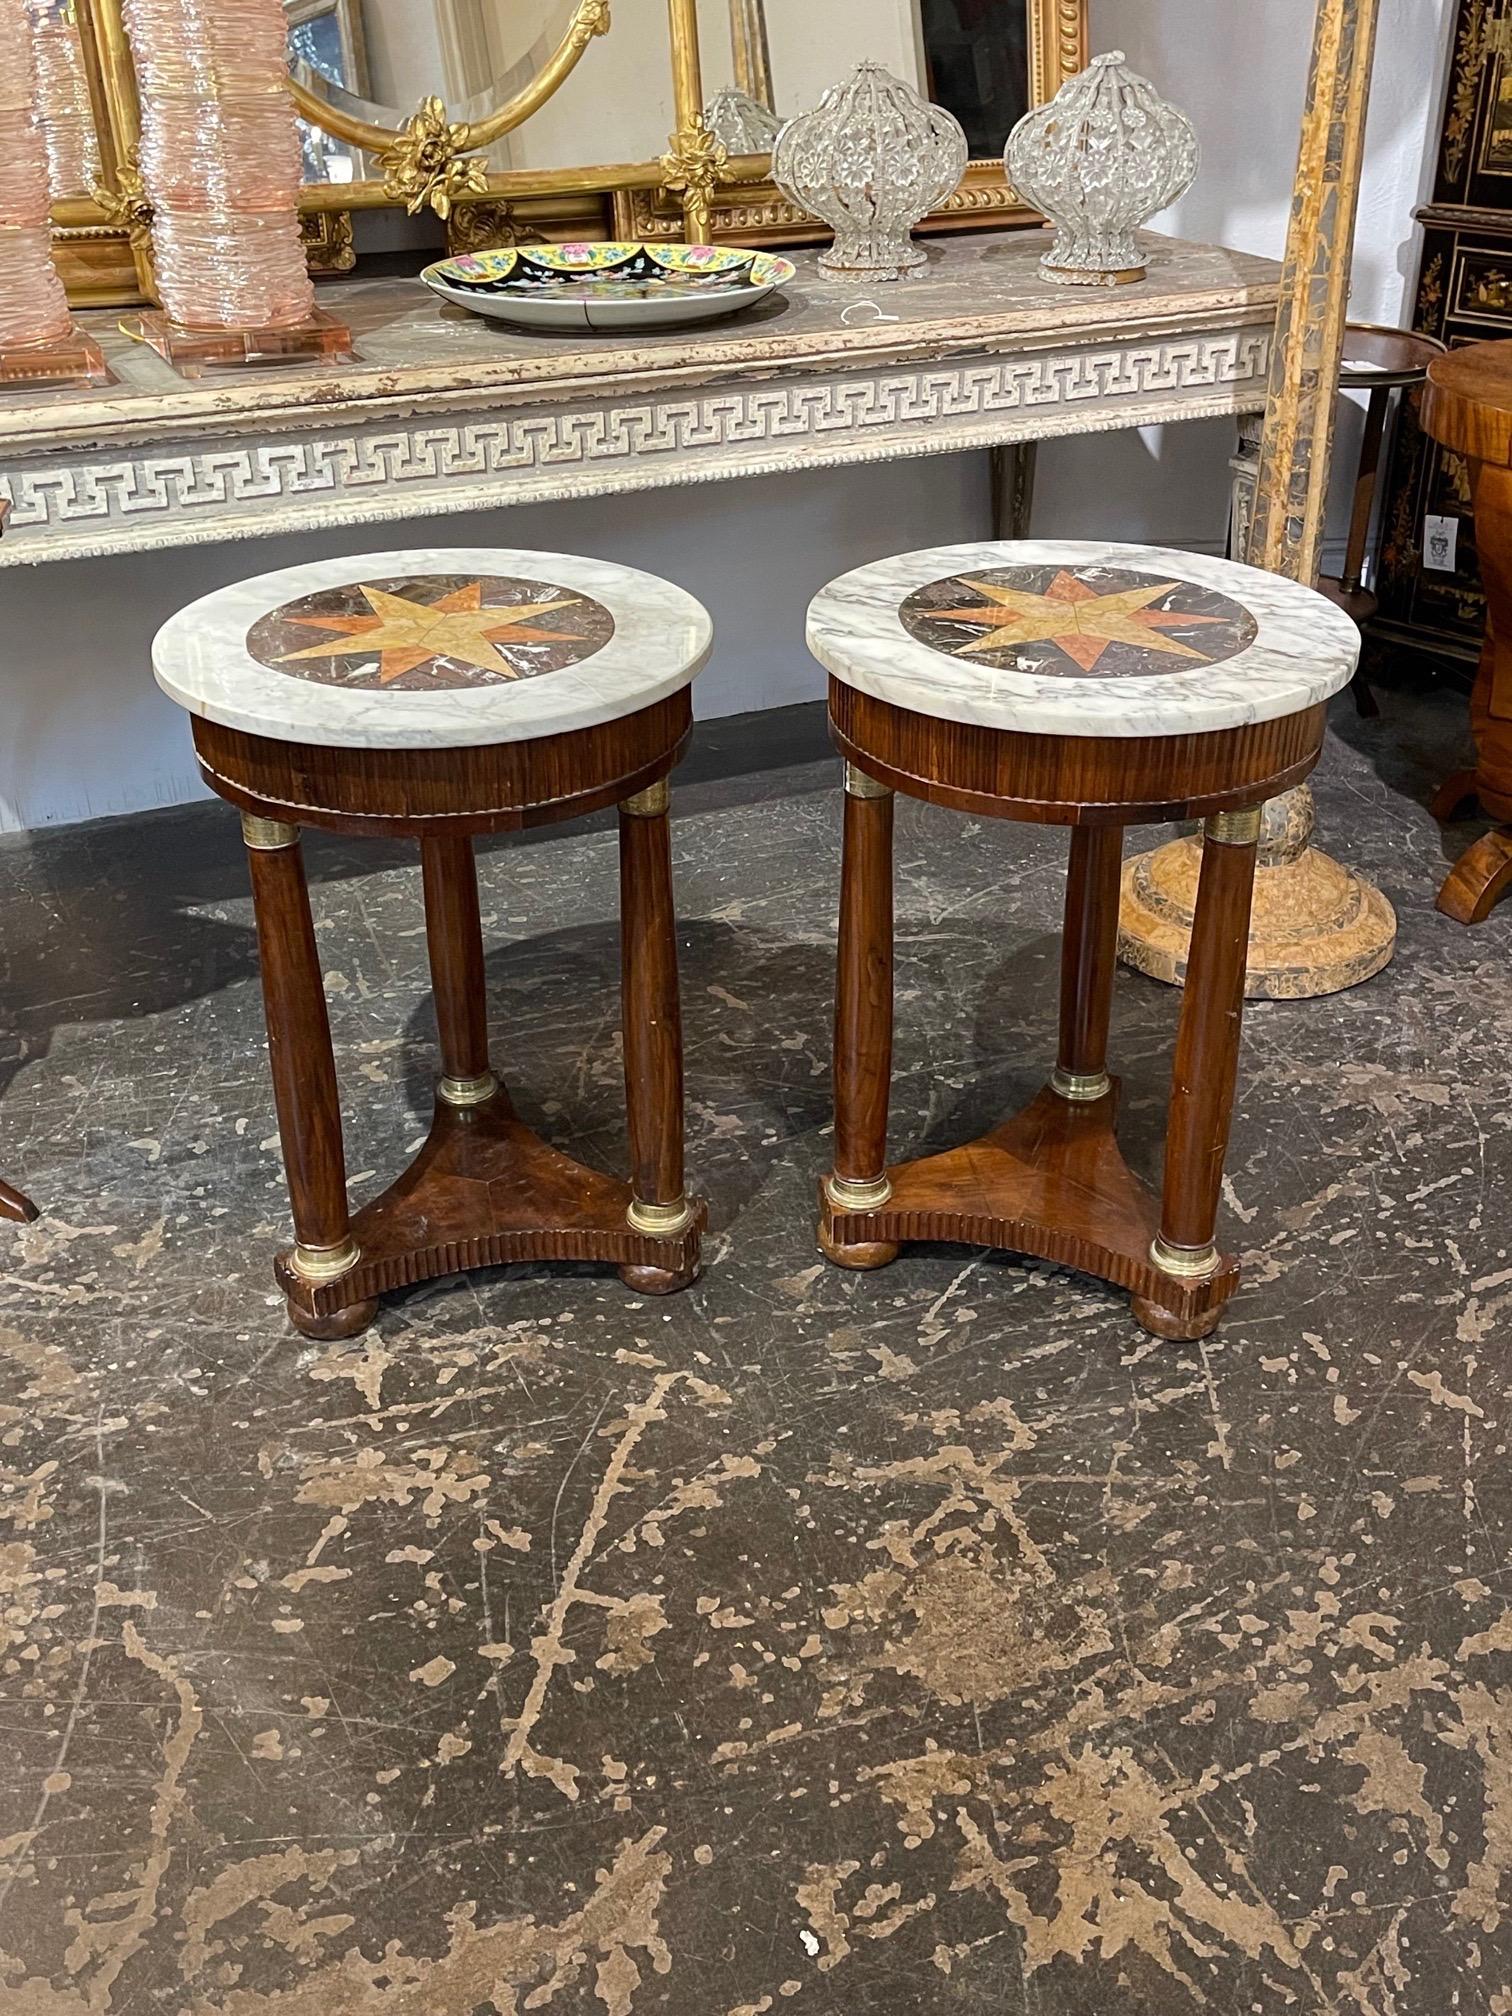 Handsome pair of 19th century Italian Empire style walnut side tables. Beautiful marble tops with pretty star pattern. Creates a very stylish look!!